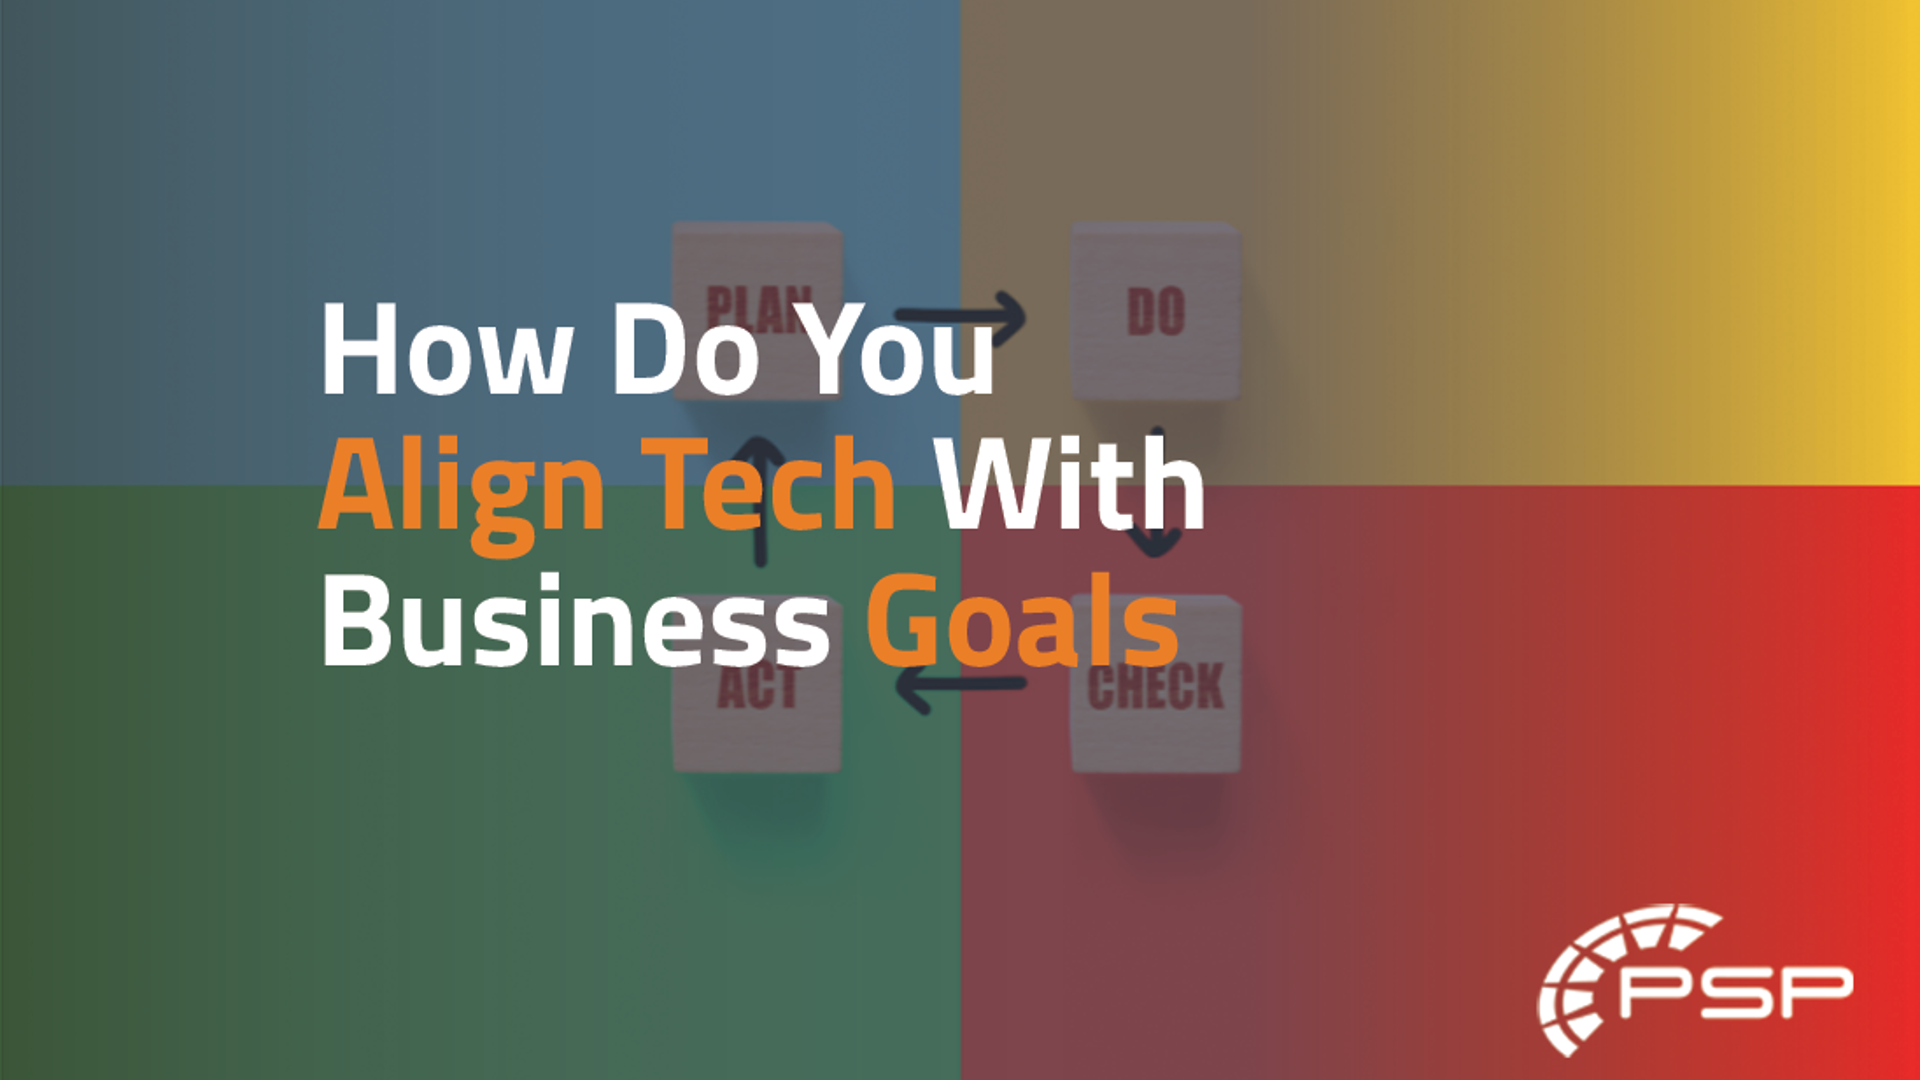 How do you align tech with business goals?